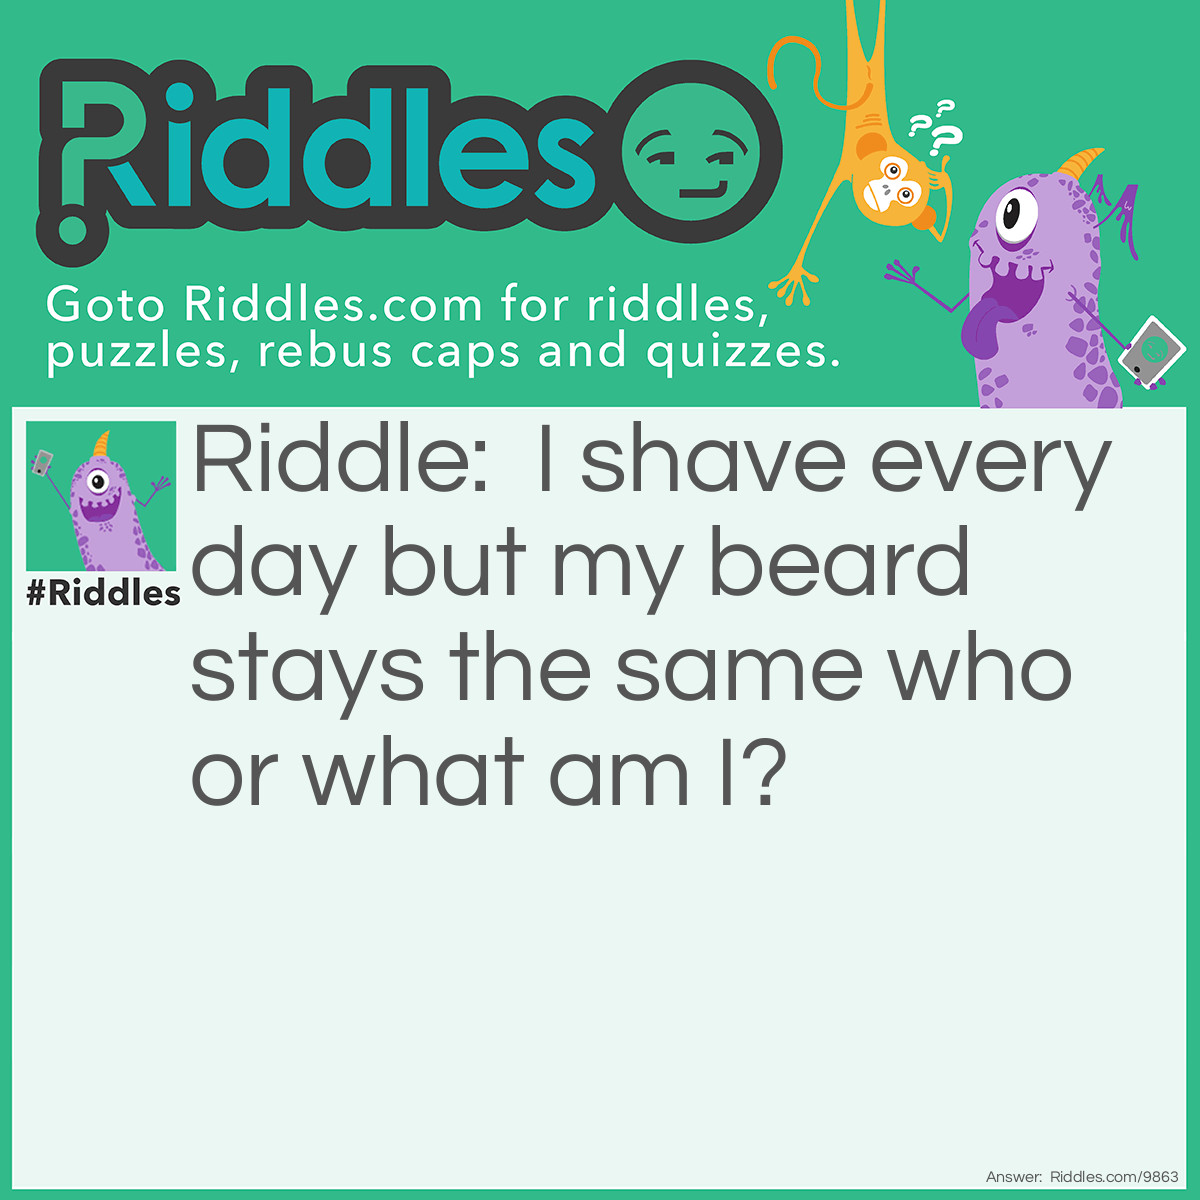 Riddle: I shave every day but my beard stays the same who or what am I? Answer: "A barber!"